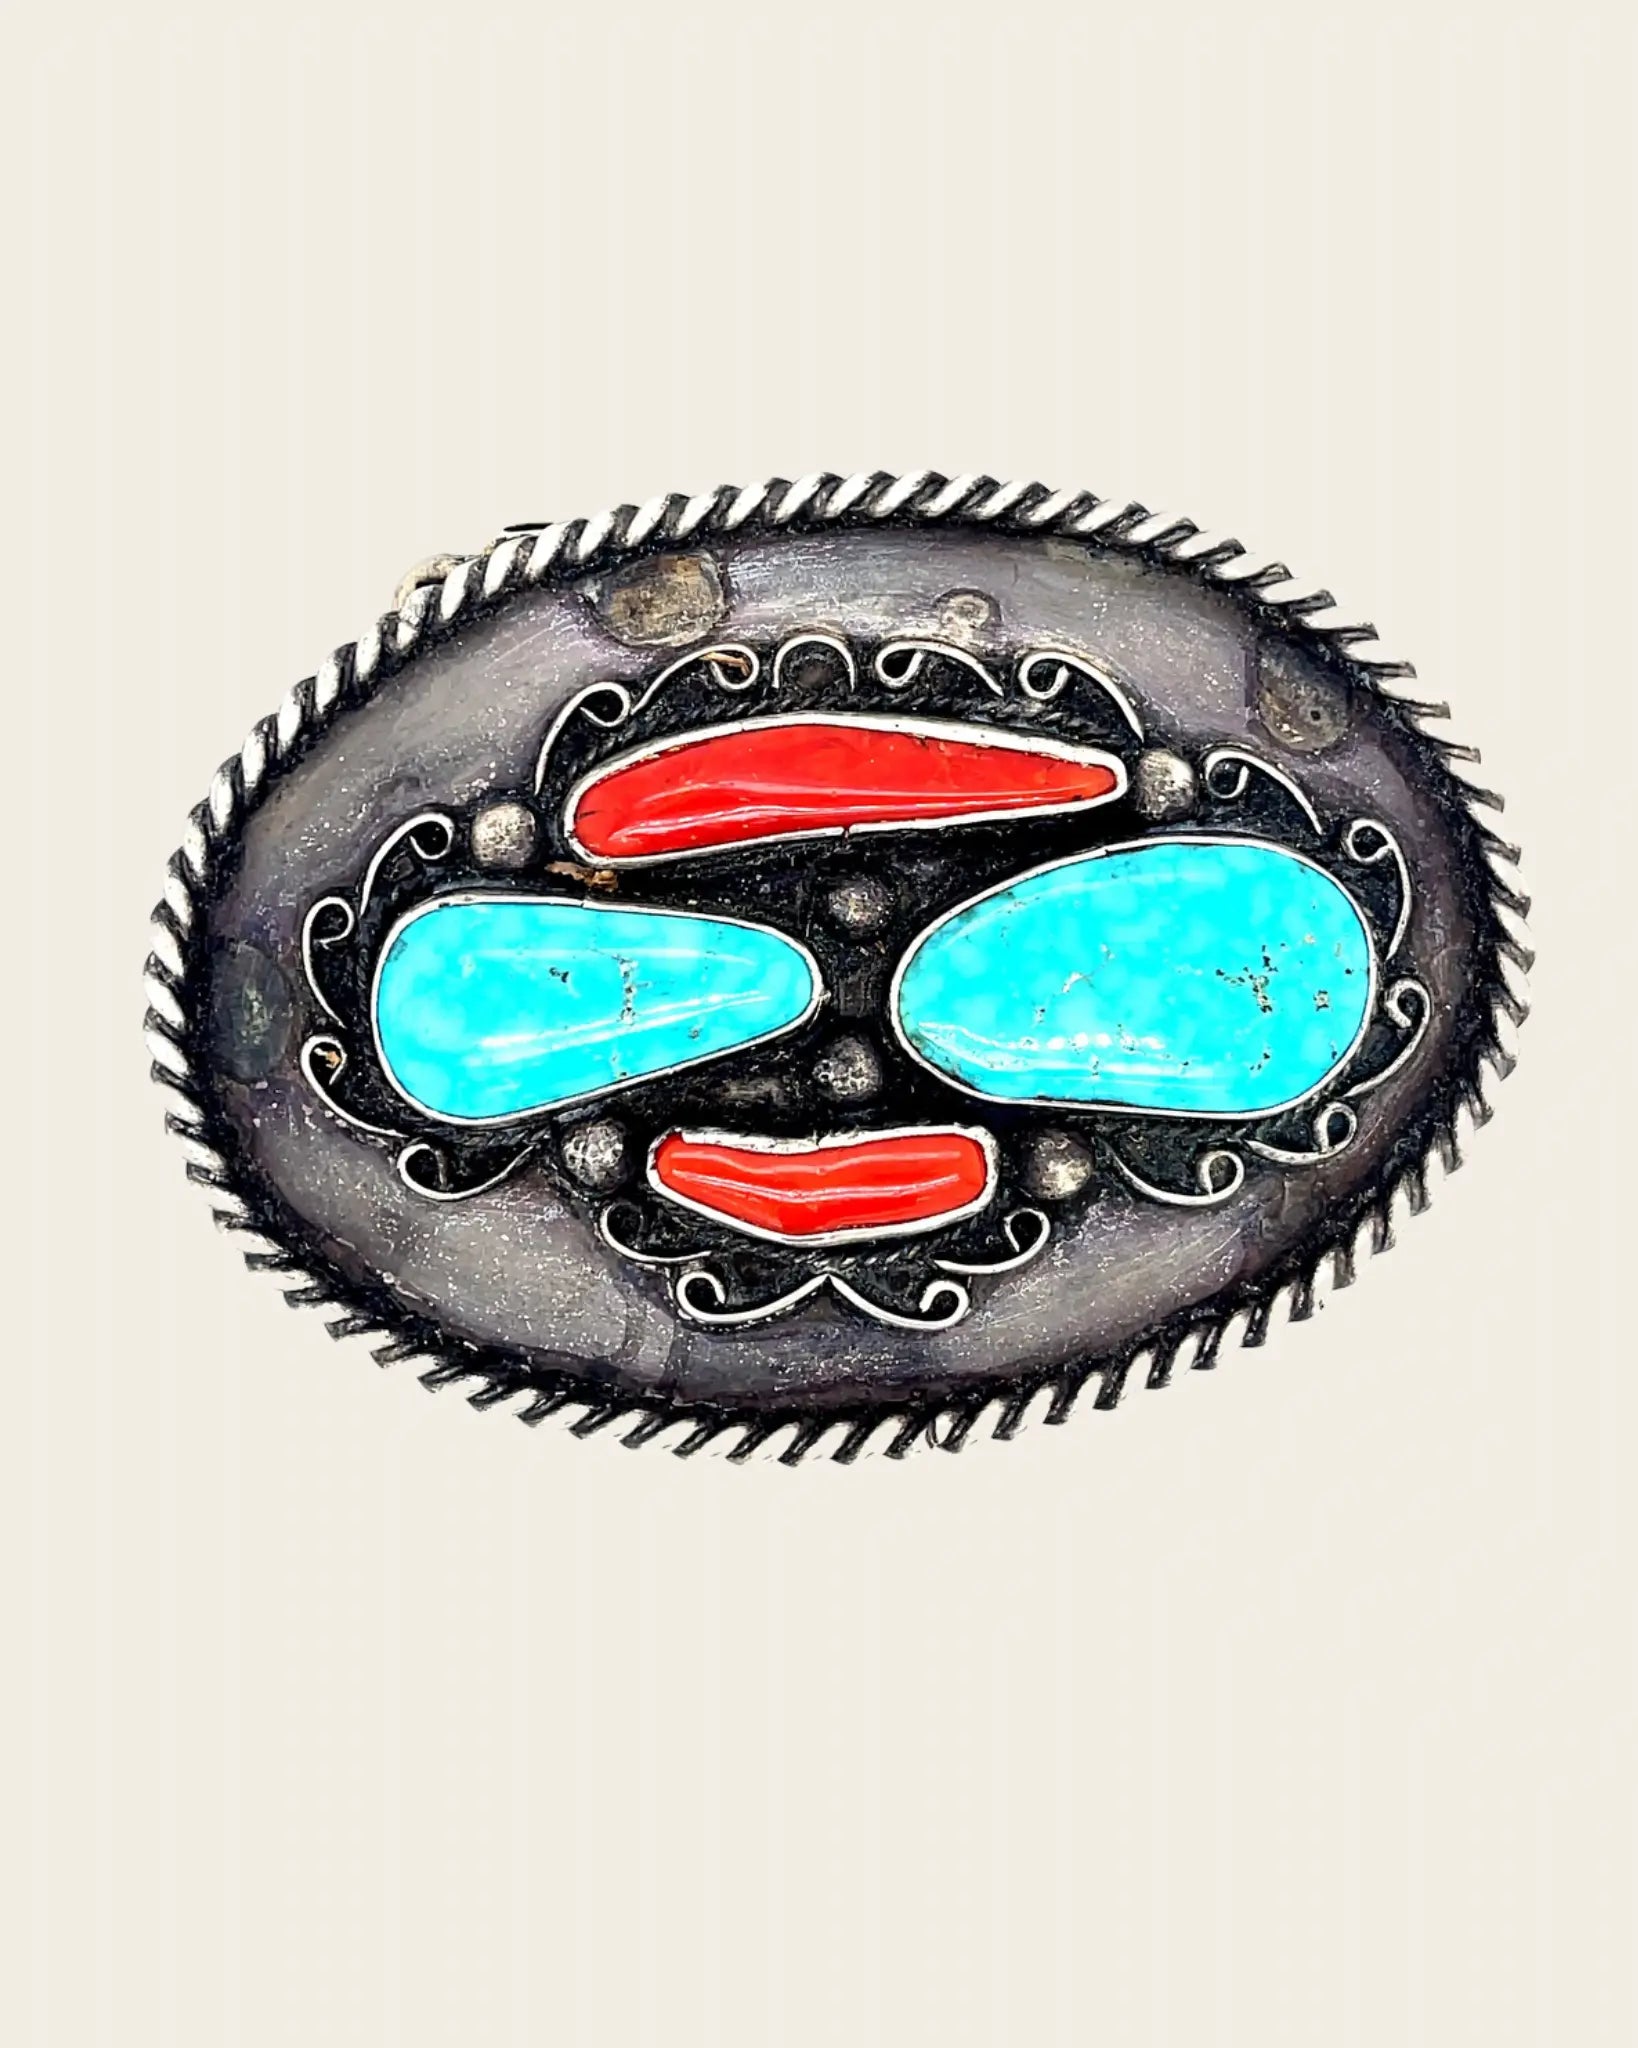 Turquoise and Coral Belt Buckle and Tip Turquoise and Coral Belt Buckle and Tip Vintage at the Squash Blossom Vintage at the Squash Blossom  Squash Blossom Vail